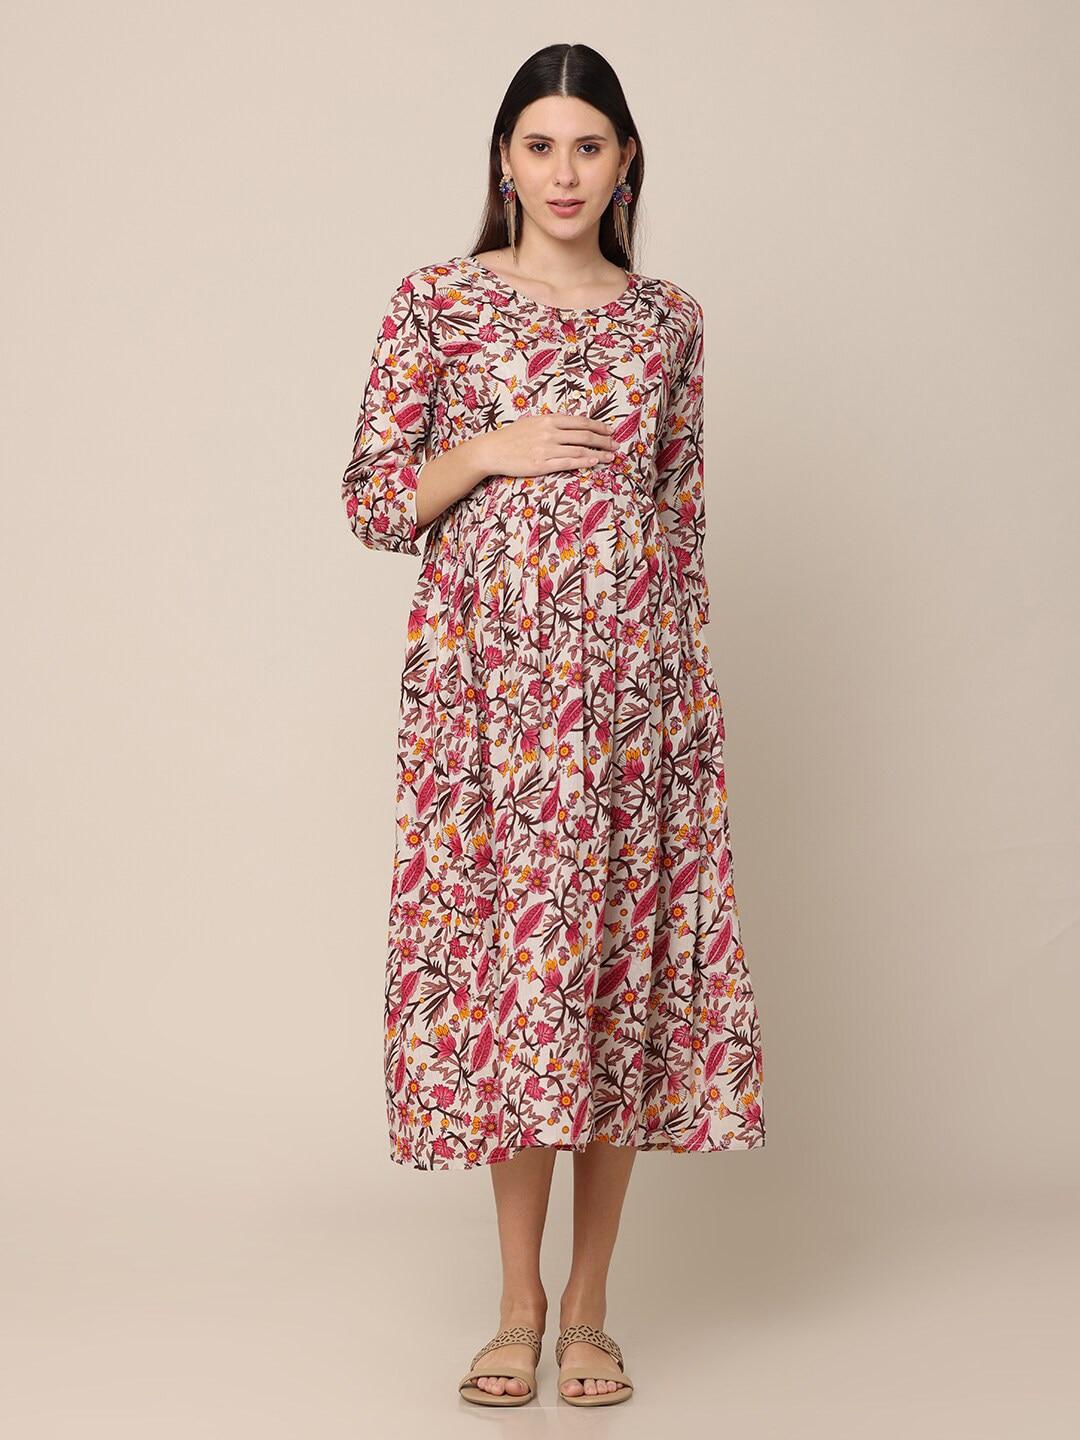 nayra-beige-&-red-floral-maternity-a-line-midi-dress